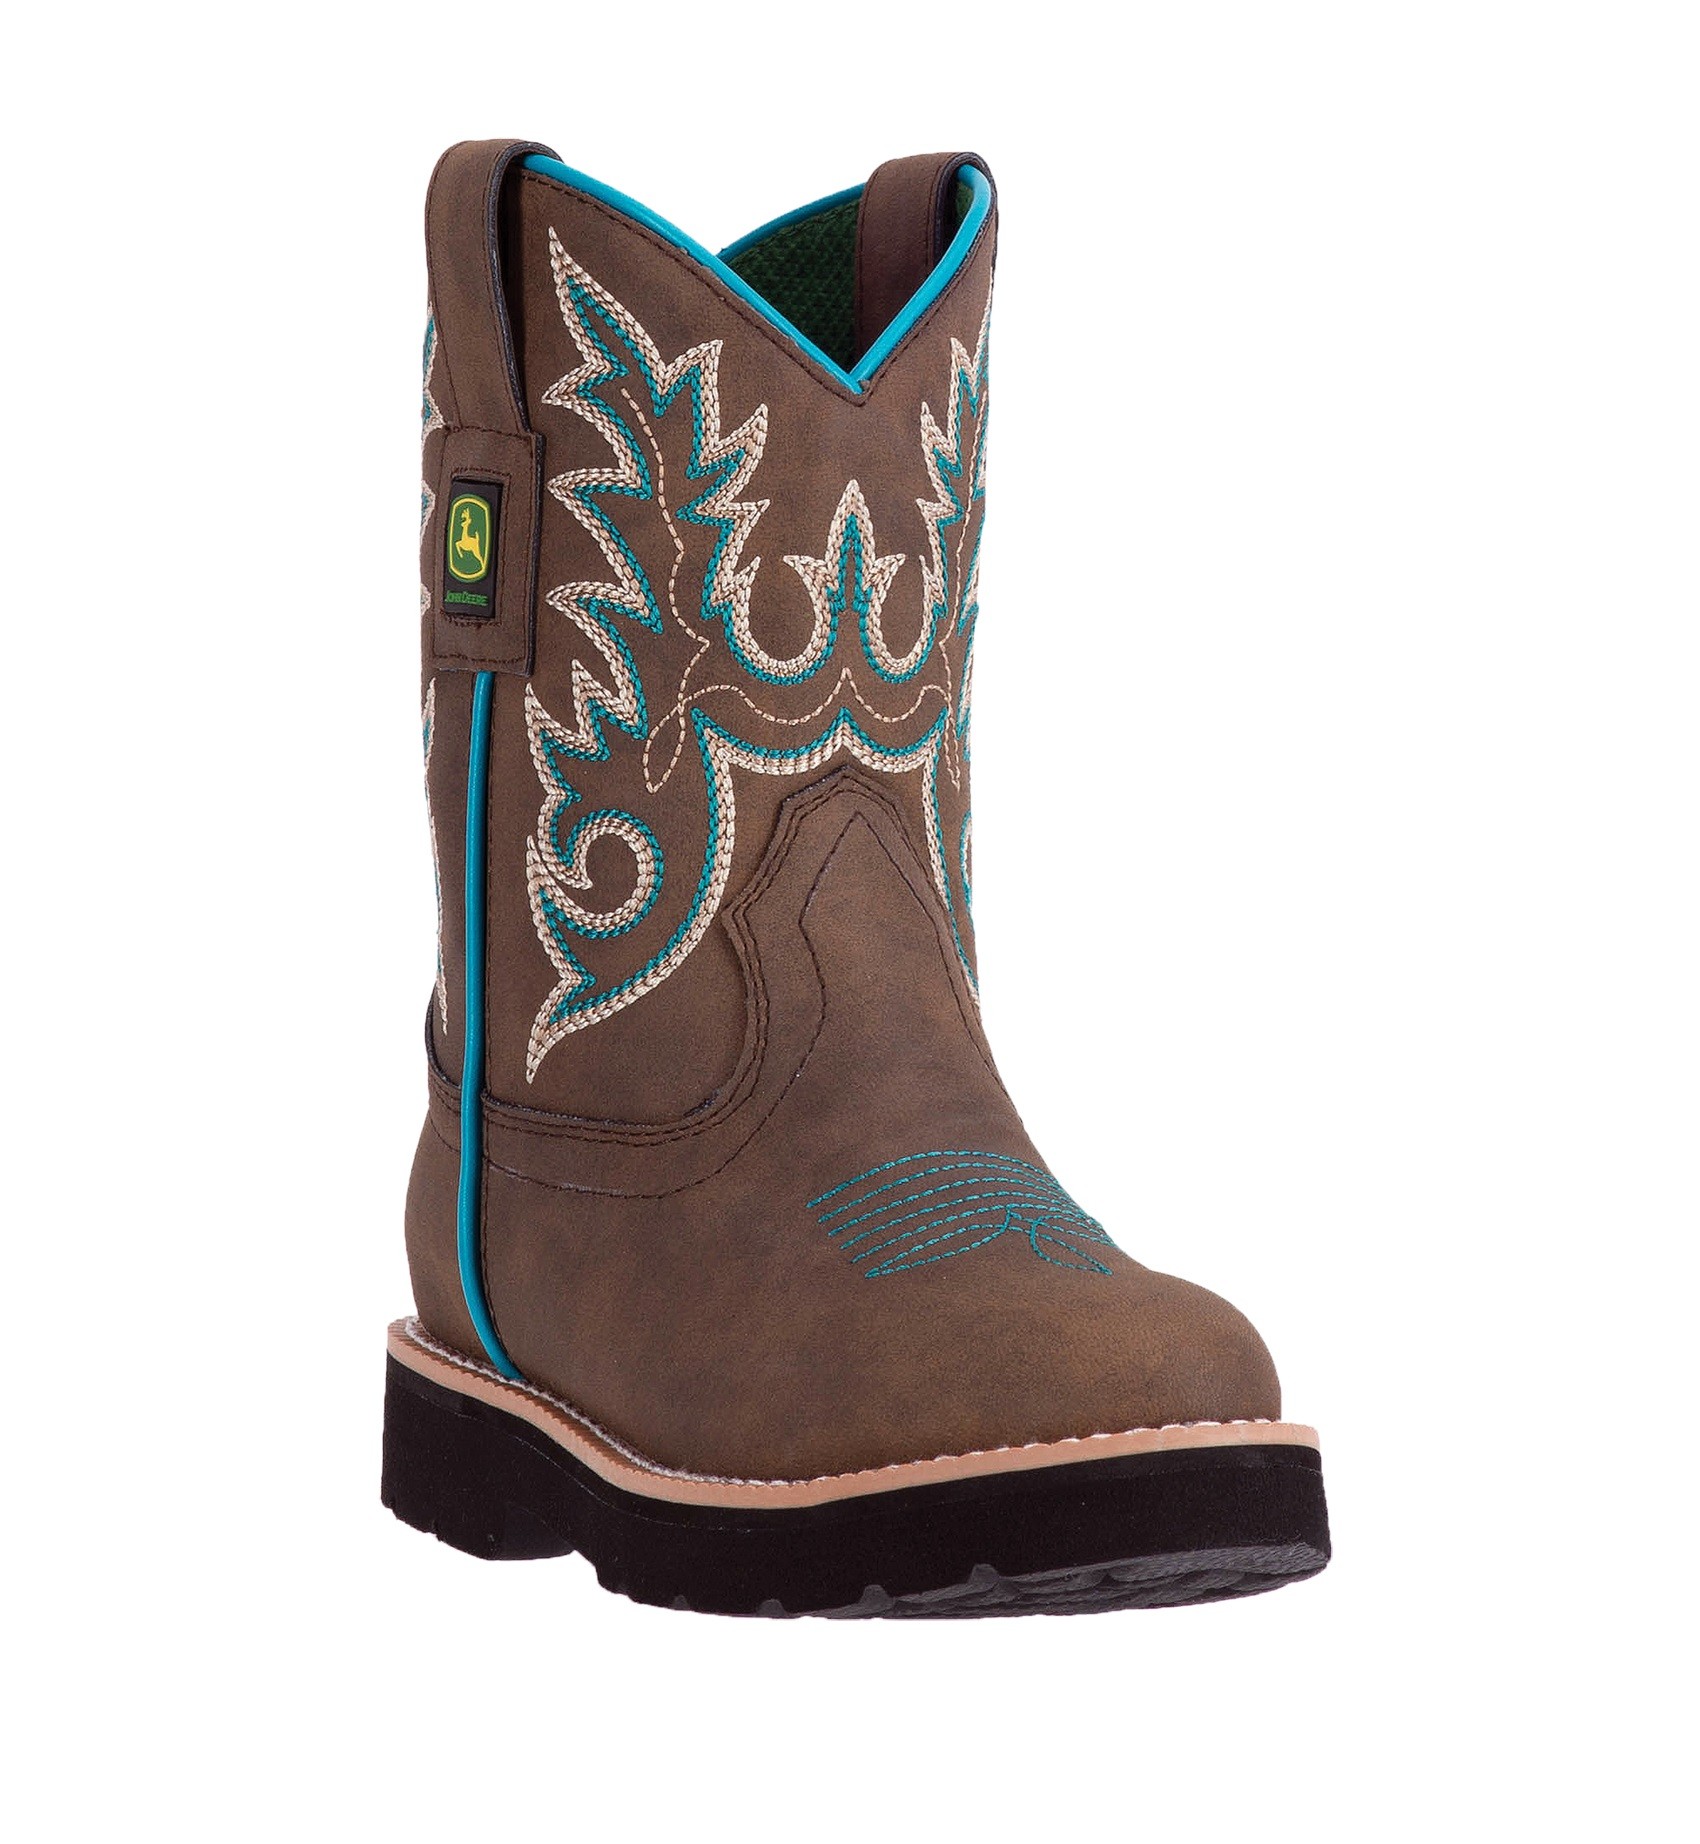 John Deere Children's Distressed/Turquoise Round Toe Boots JD2032 by ...